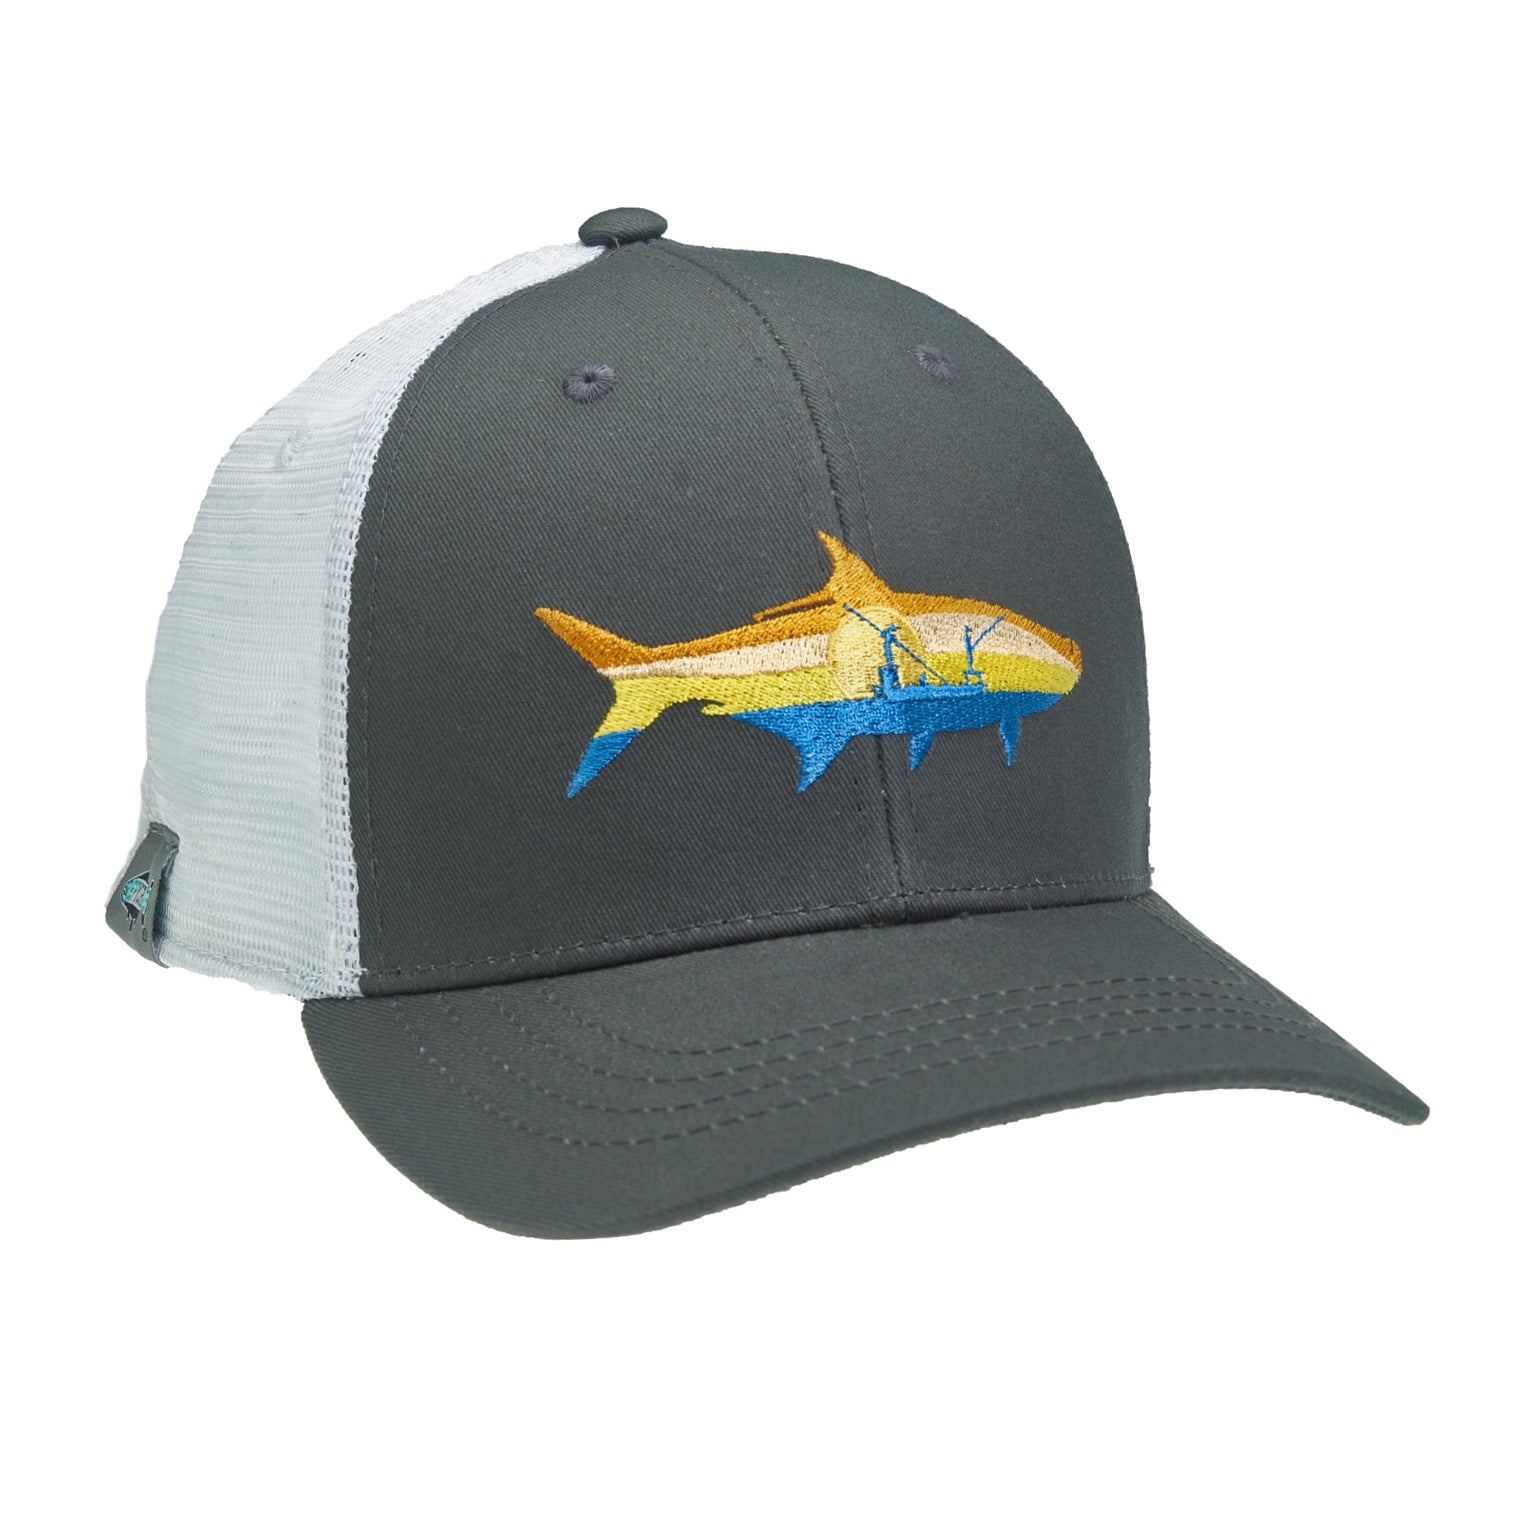 A hat with white mesh in back and gray fabric in front that features a tarpon shape with a boat and sunrise in side it